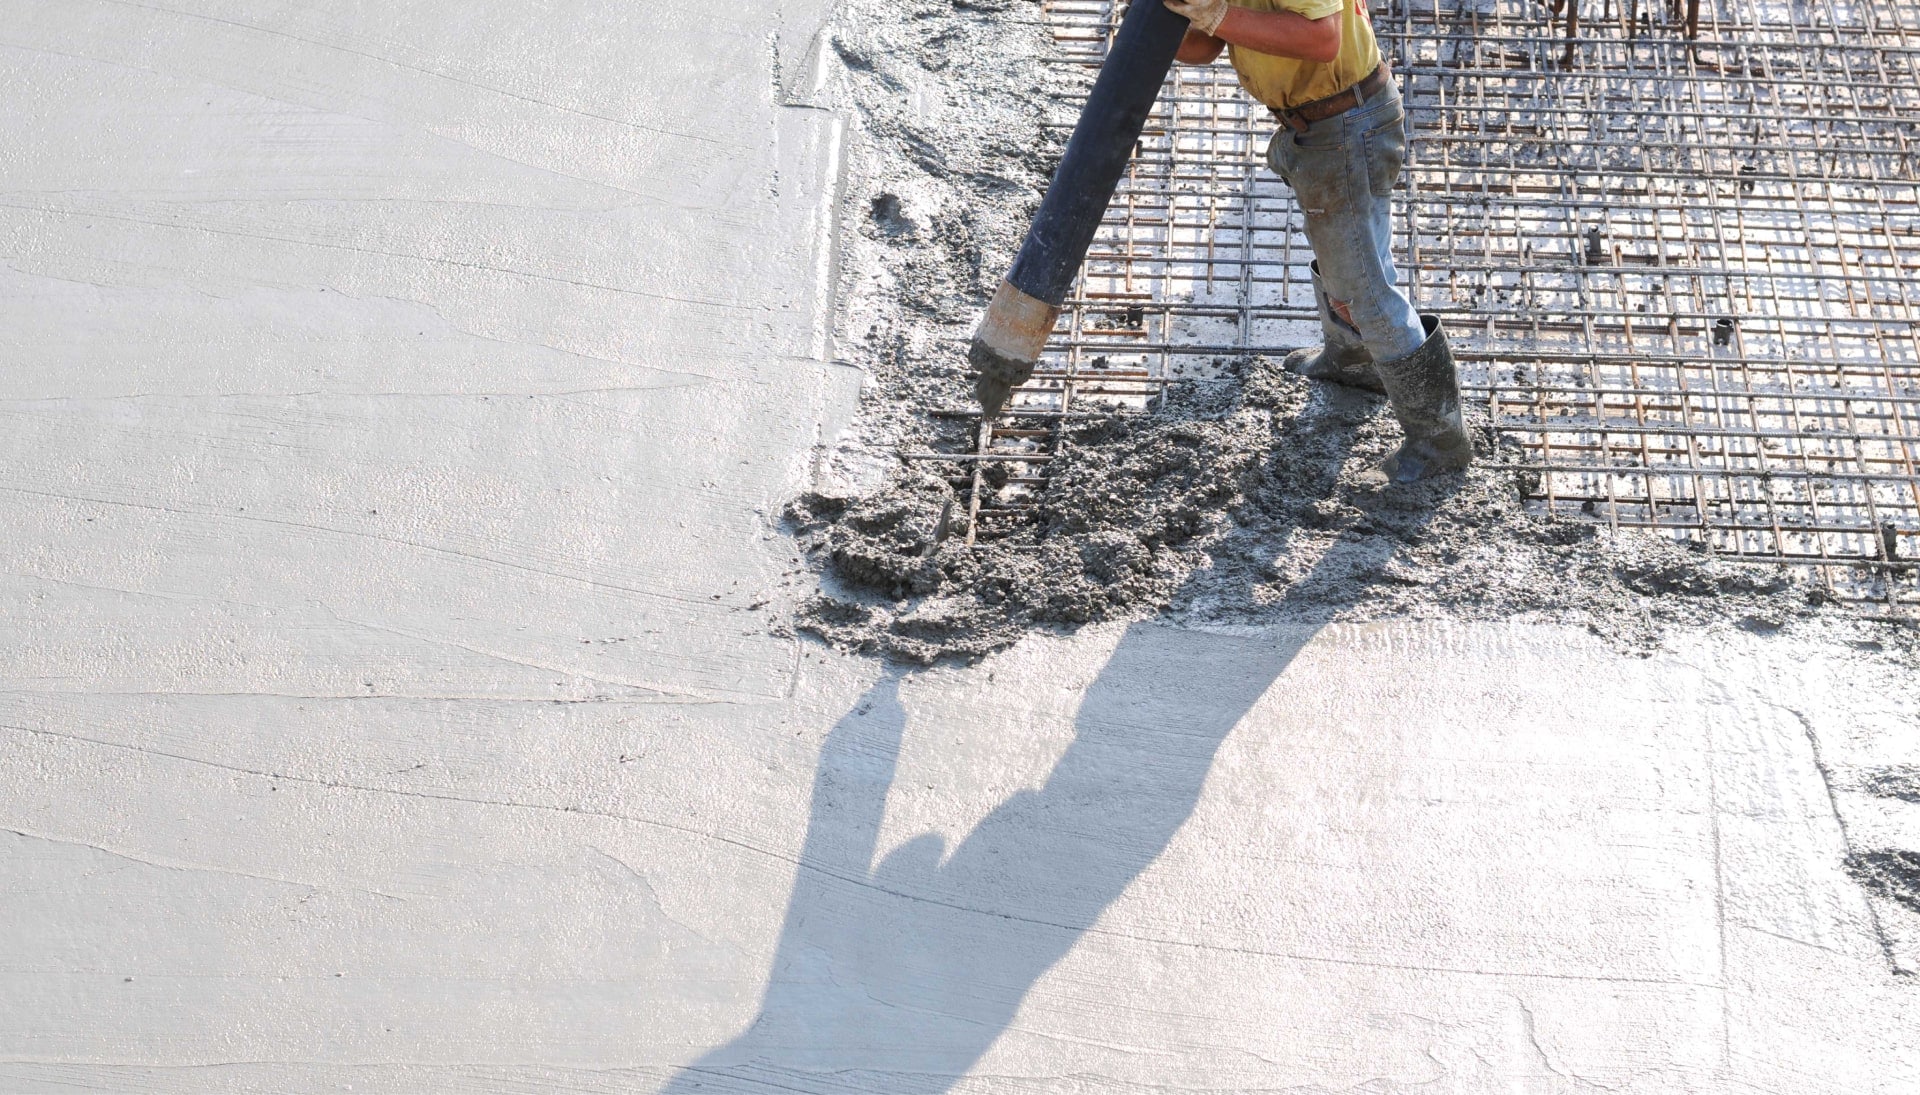 High-Quality Concrete Foundation Services Evansville Trust Experienced Contractors for Strong Concrete Foundations for Residential or Commercial Projects.